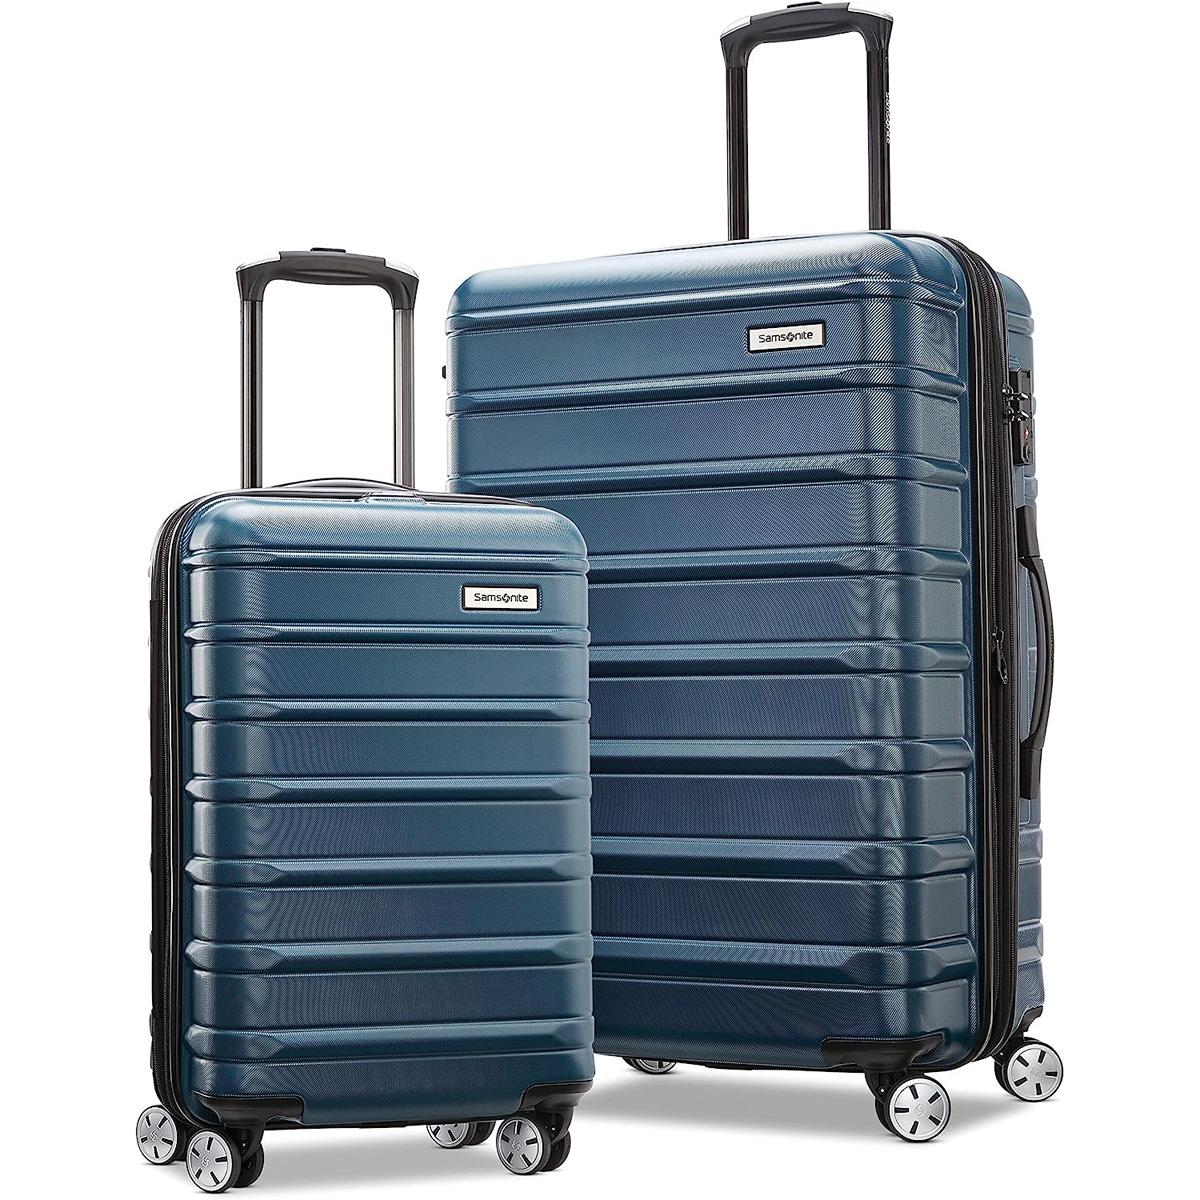 Samsonite Omni 2 Hardside Expandable Luggage with Spinner Wheels Teal for $135.53